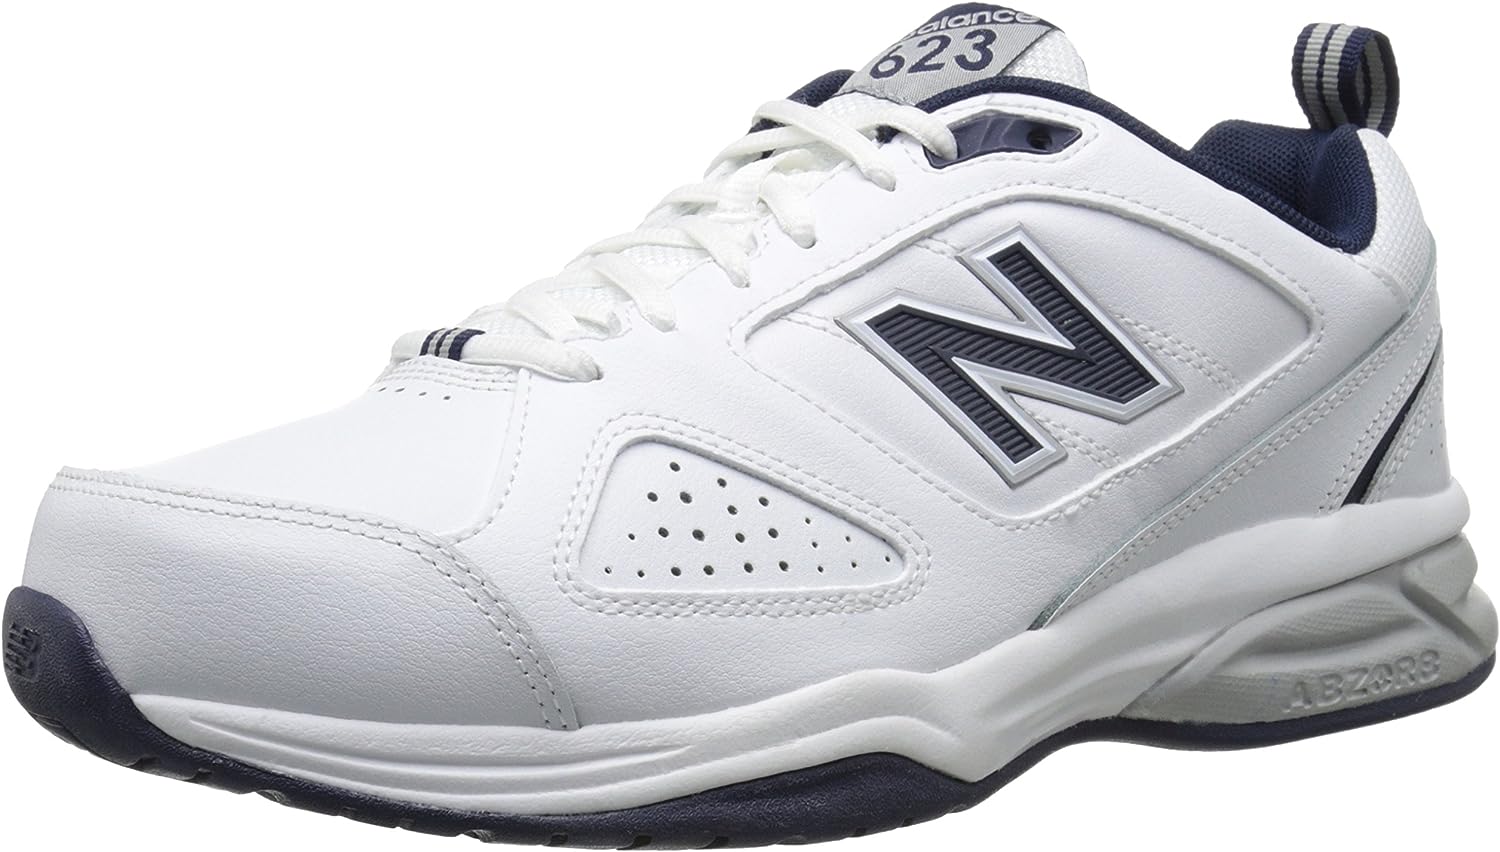 New Balance Men’s 623 V3 Casual Comfort Cross Trainer Review